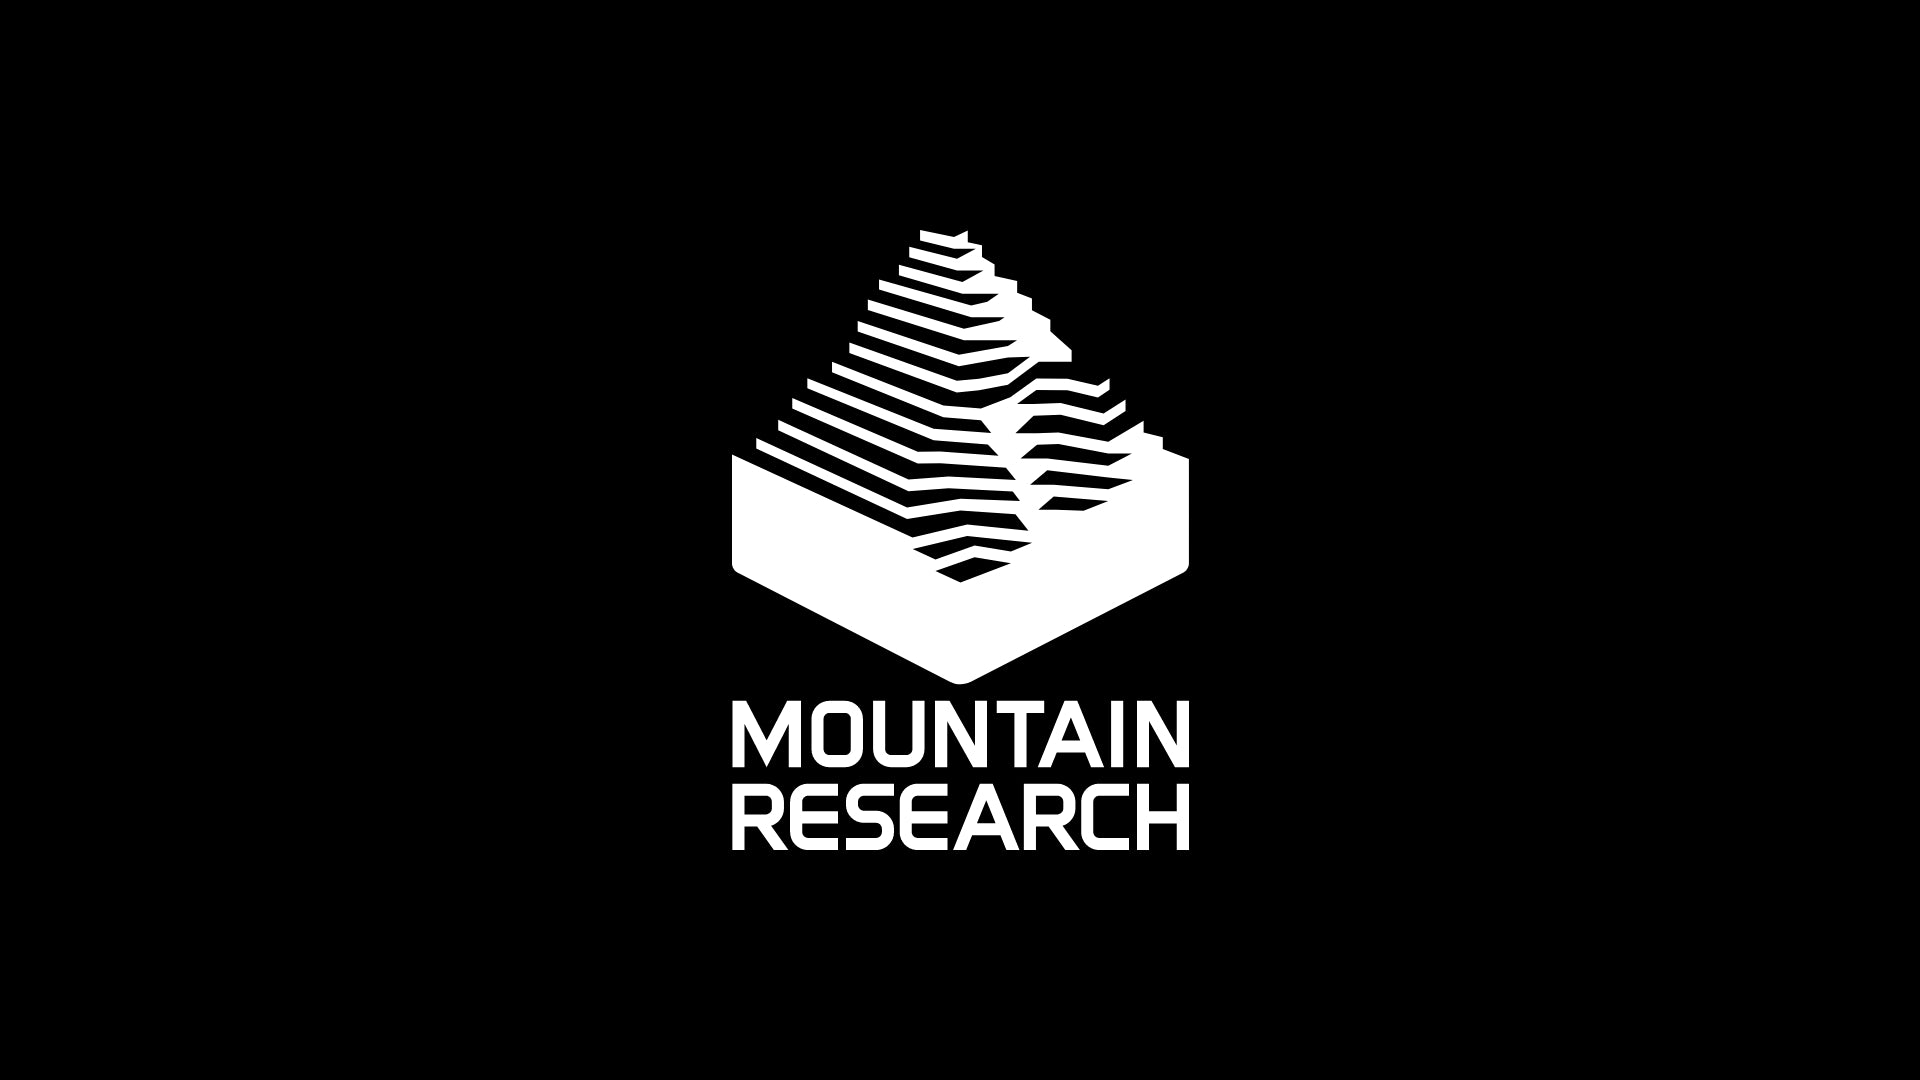 LOOK – MOUNTAIN RESEARCH